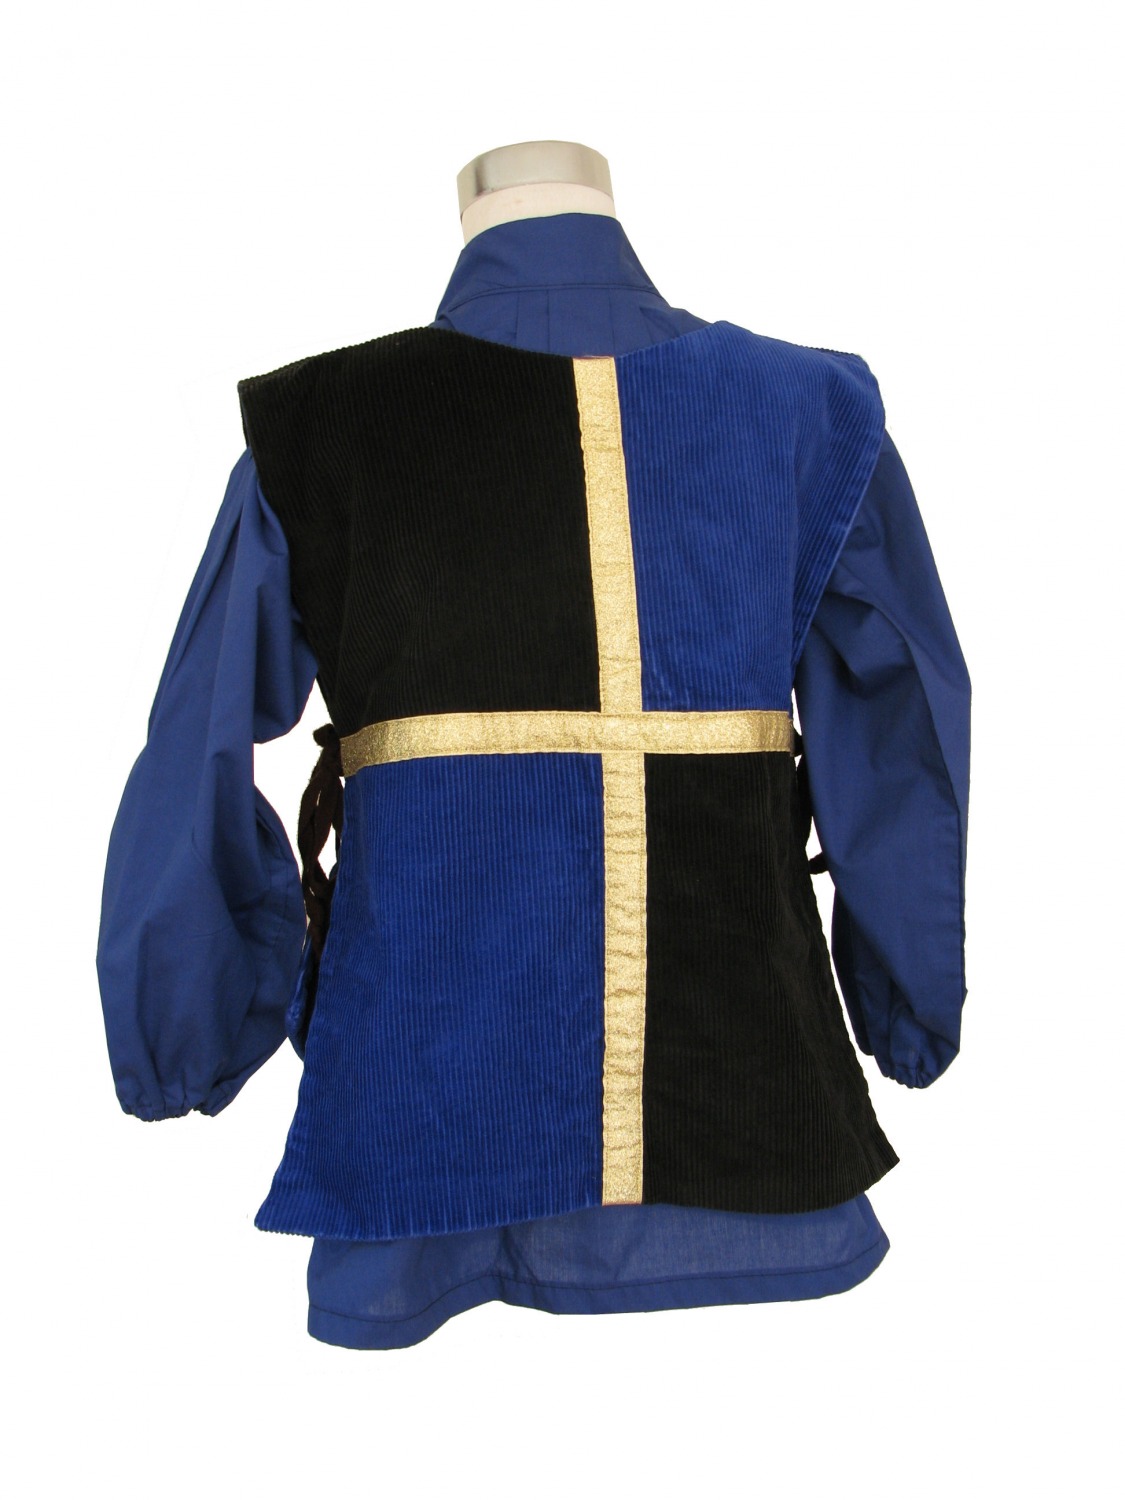 Boy's Medieval Peasant Tabard Costume Age 3 - 5 Years Image